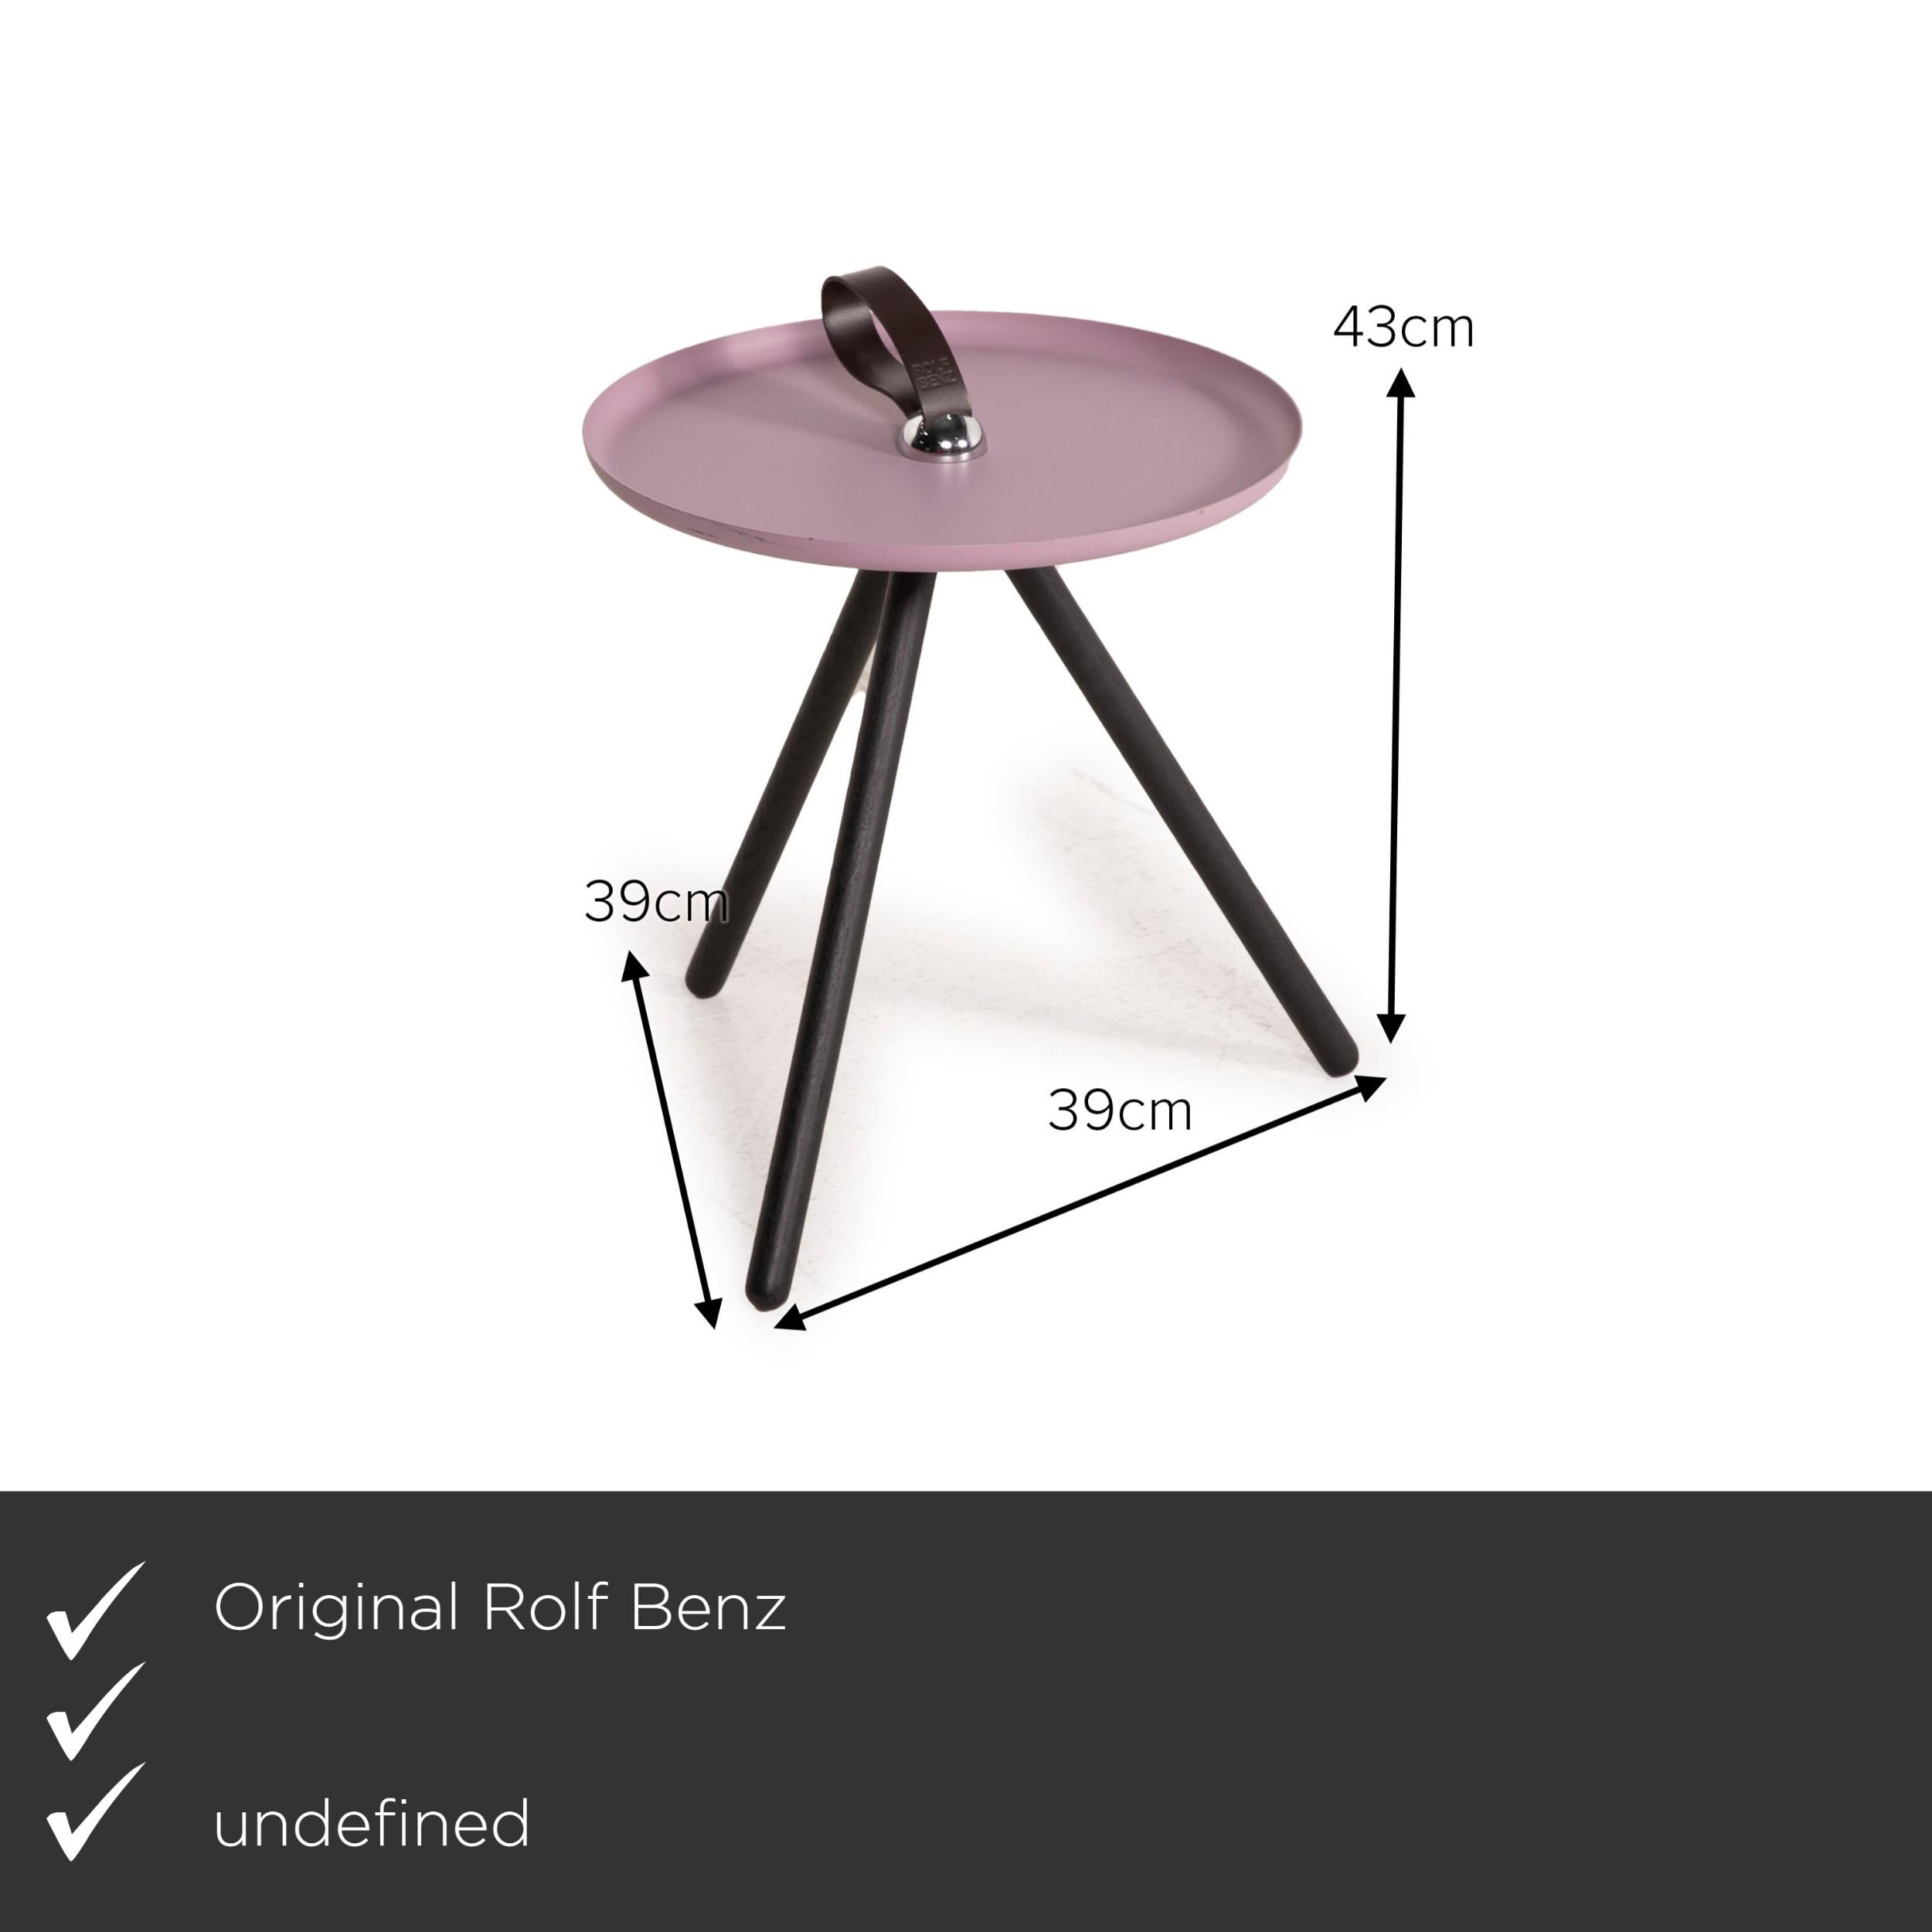 We present to you a Rolf Benz 973 metal table pink coffee table side table walnut sheet steel wood.

Product measurements in centimeters:

Depth 39
Width 39
Height 43.







   